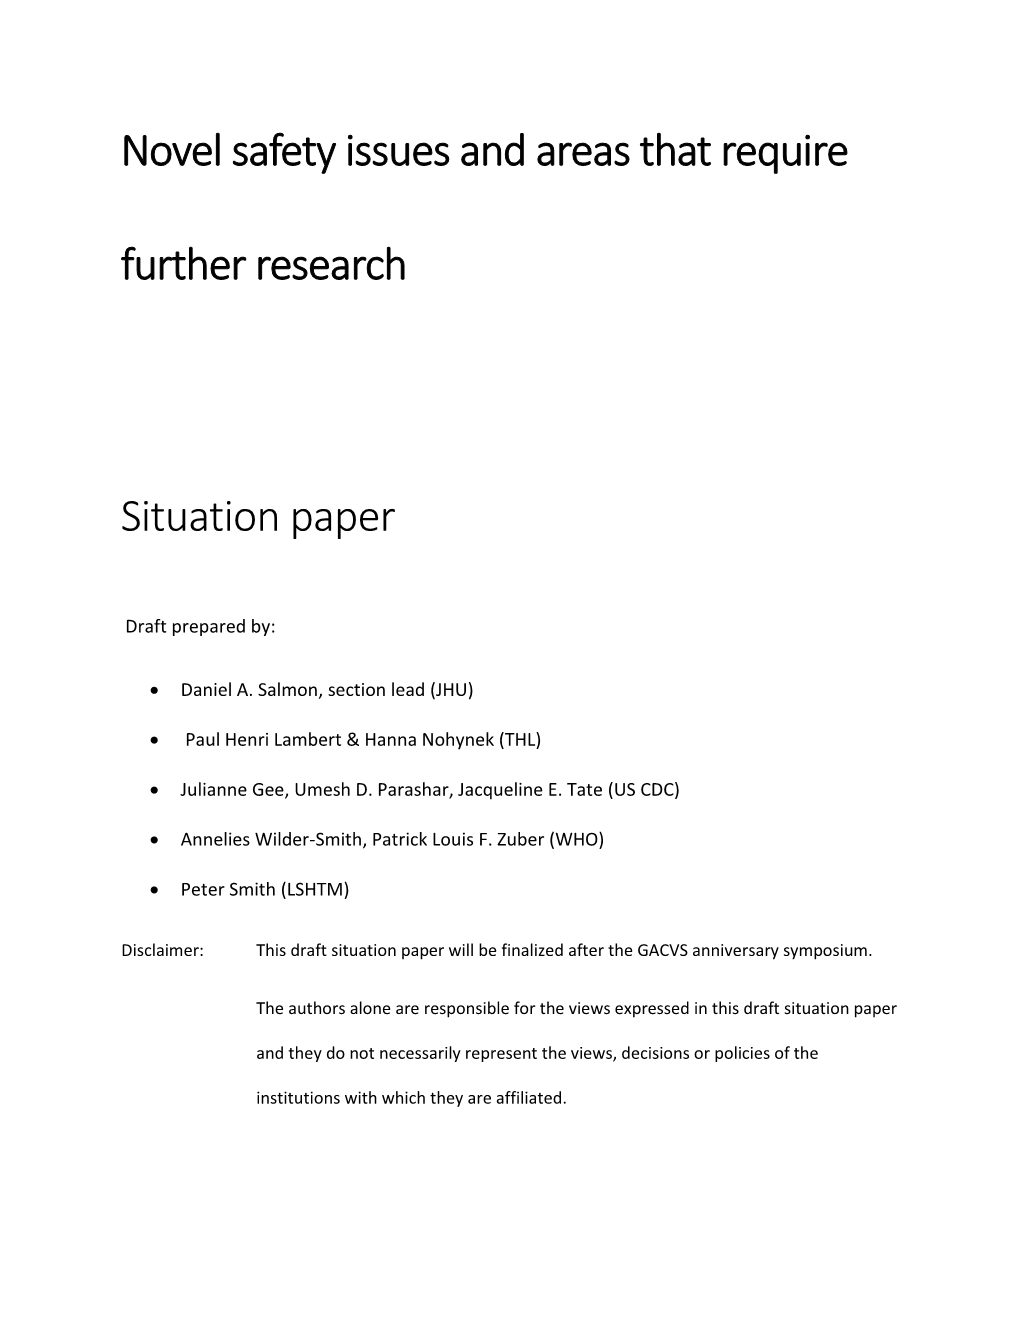 Novel Safety Issues and Areas That Require Further Research Situation Paper